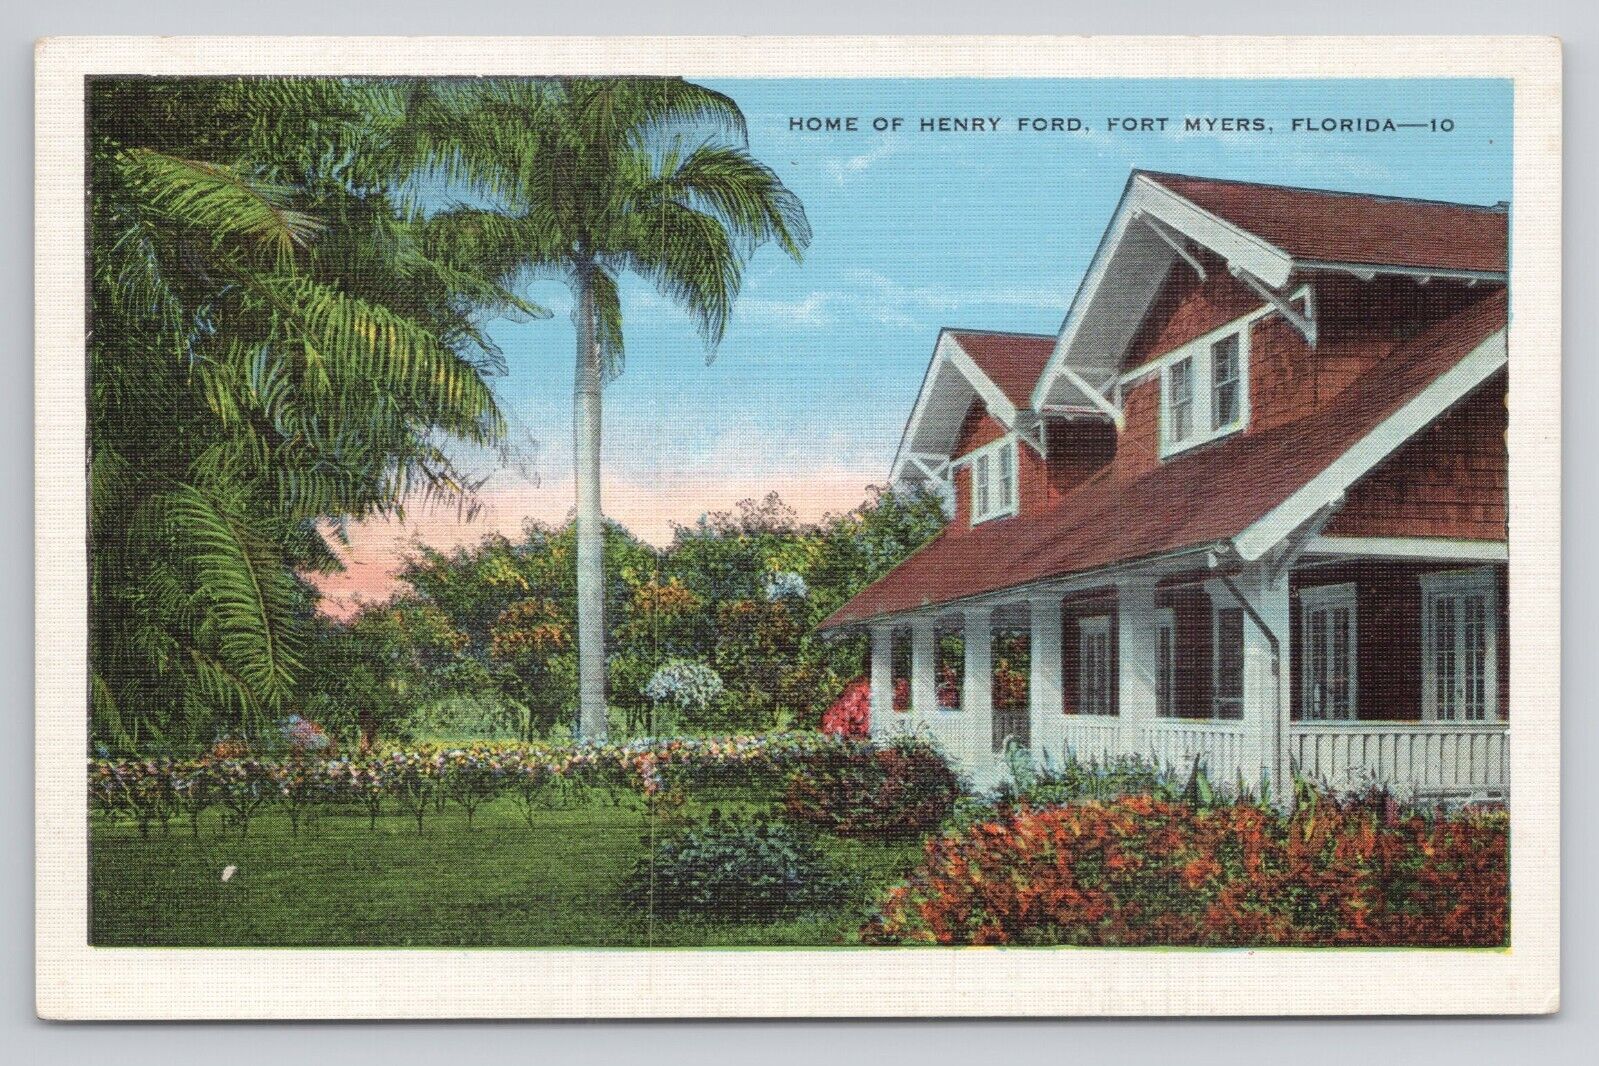 Home of Henry Ford Fort Myers Florida Linen Postcard No 6013